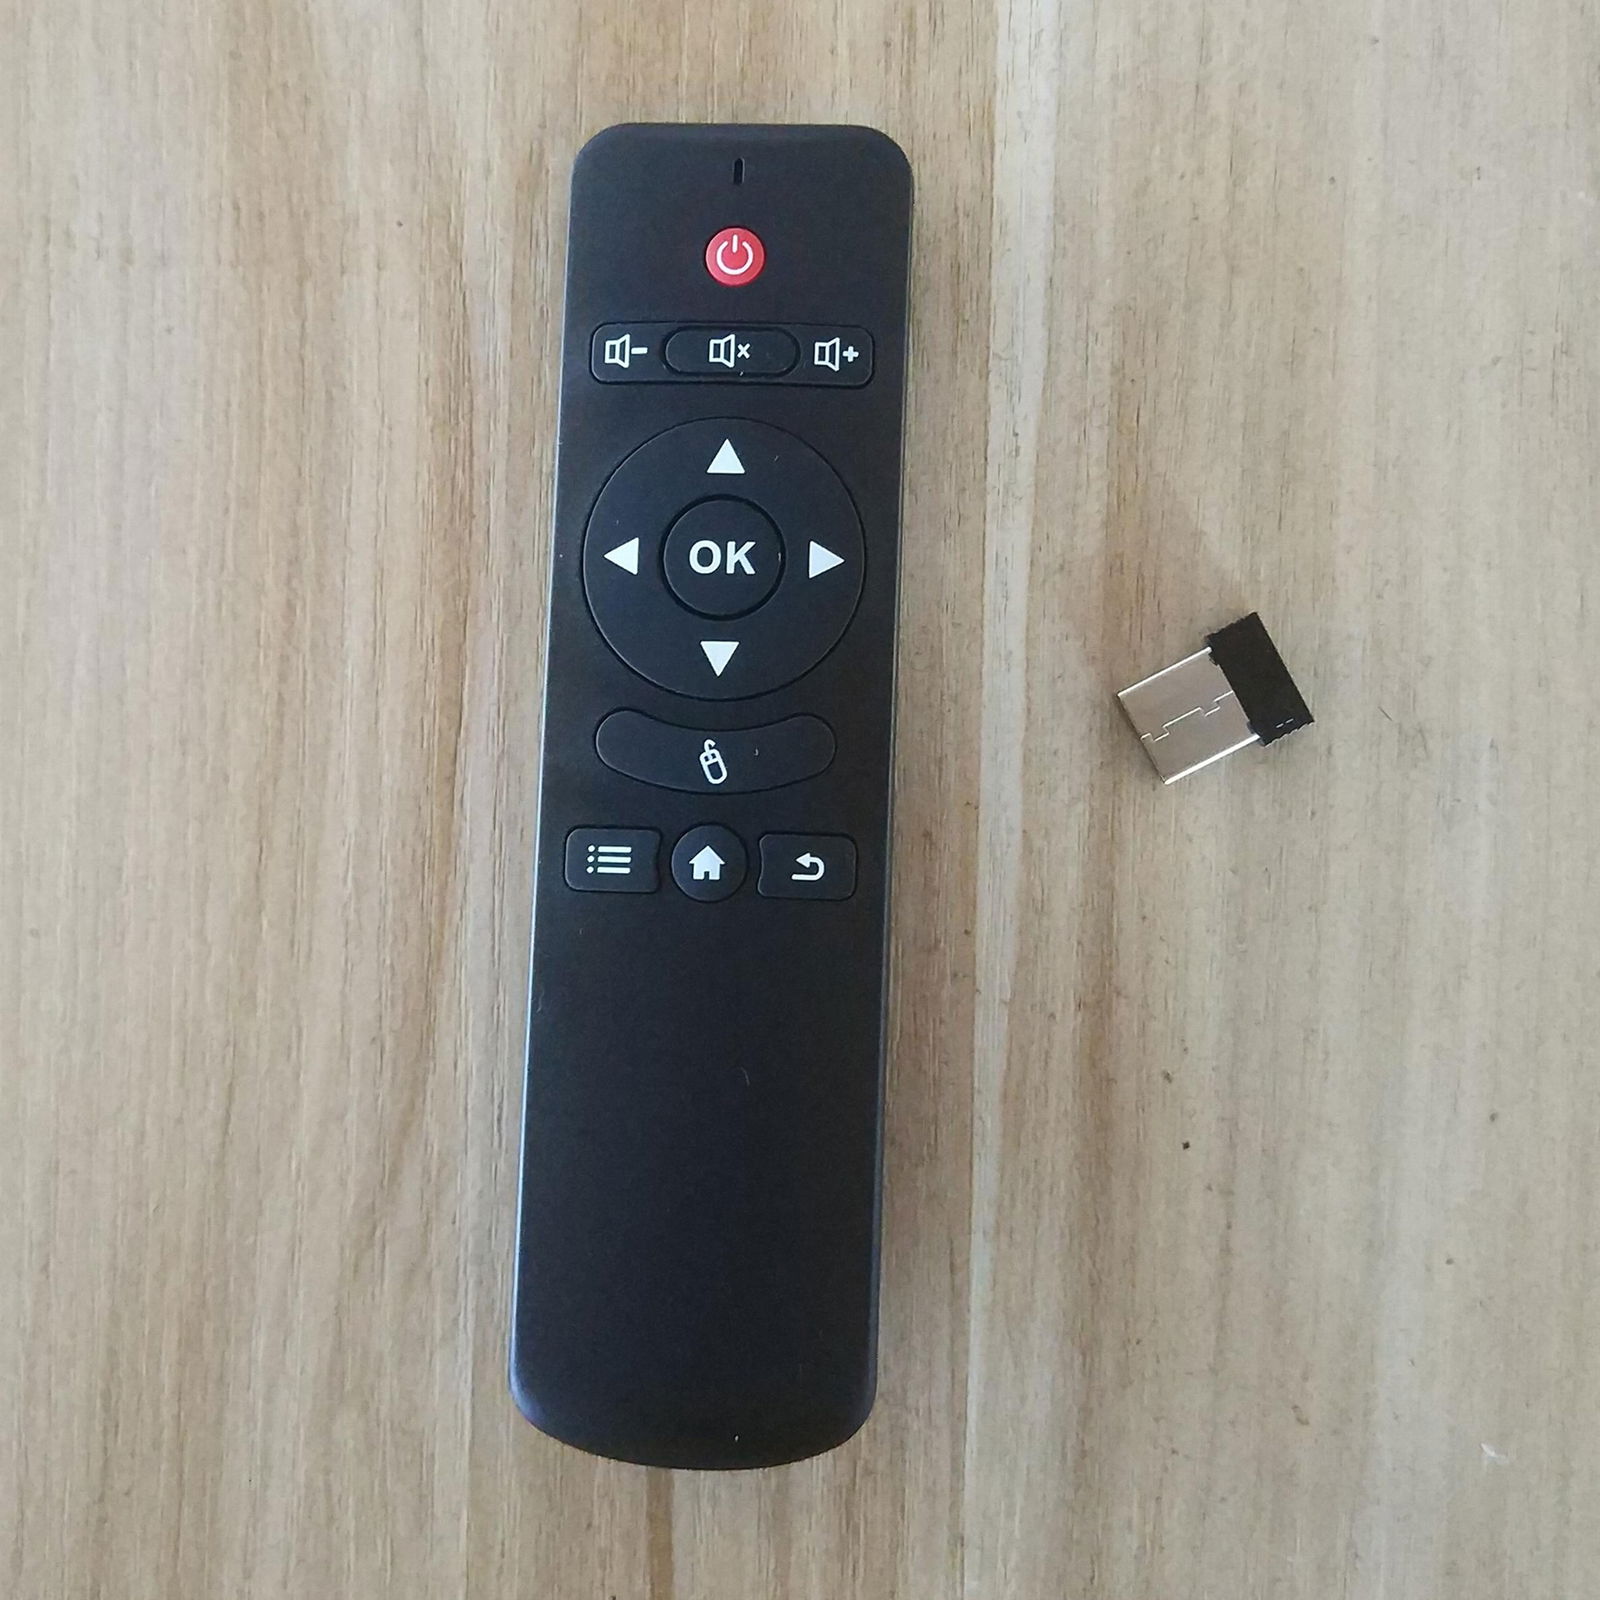 2.4G remote control BOTH IR AND RF 2